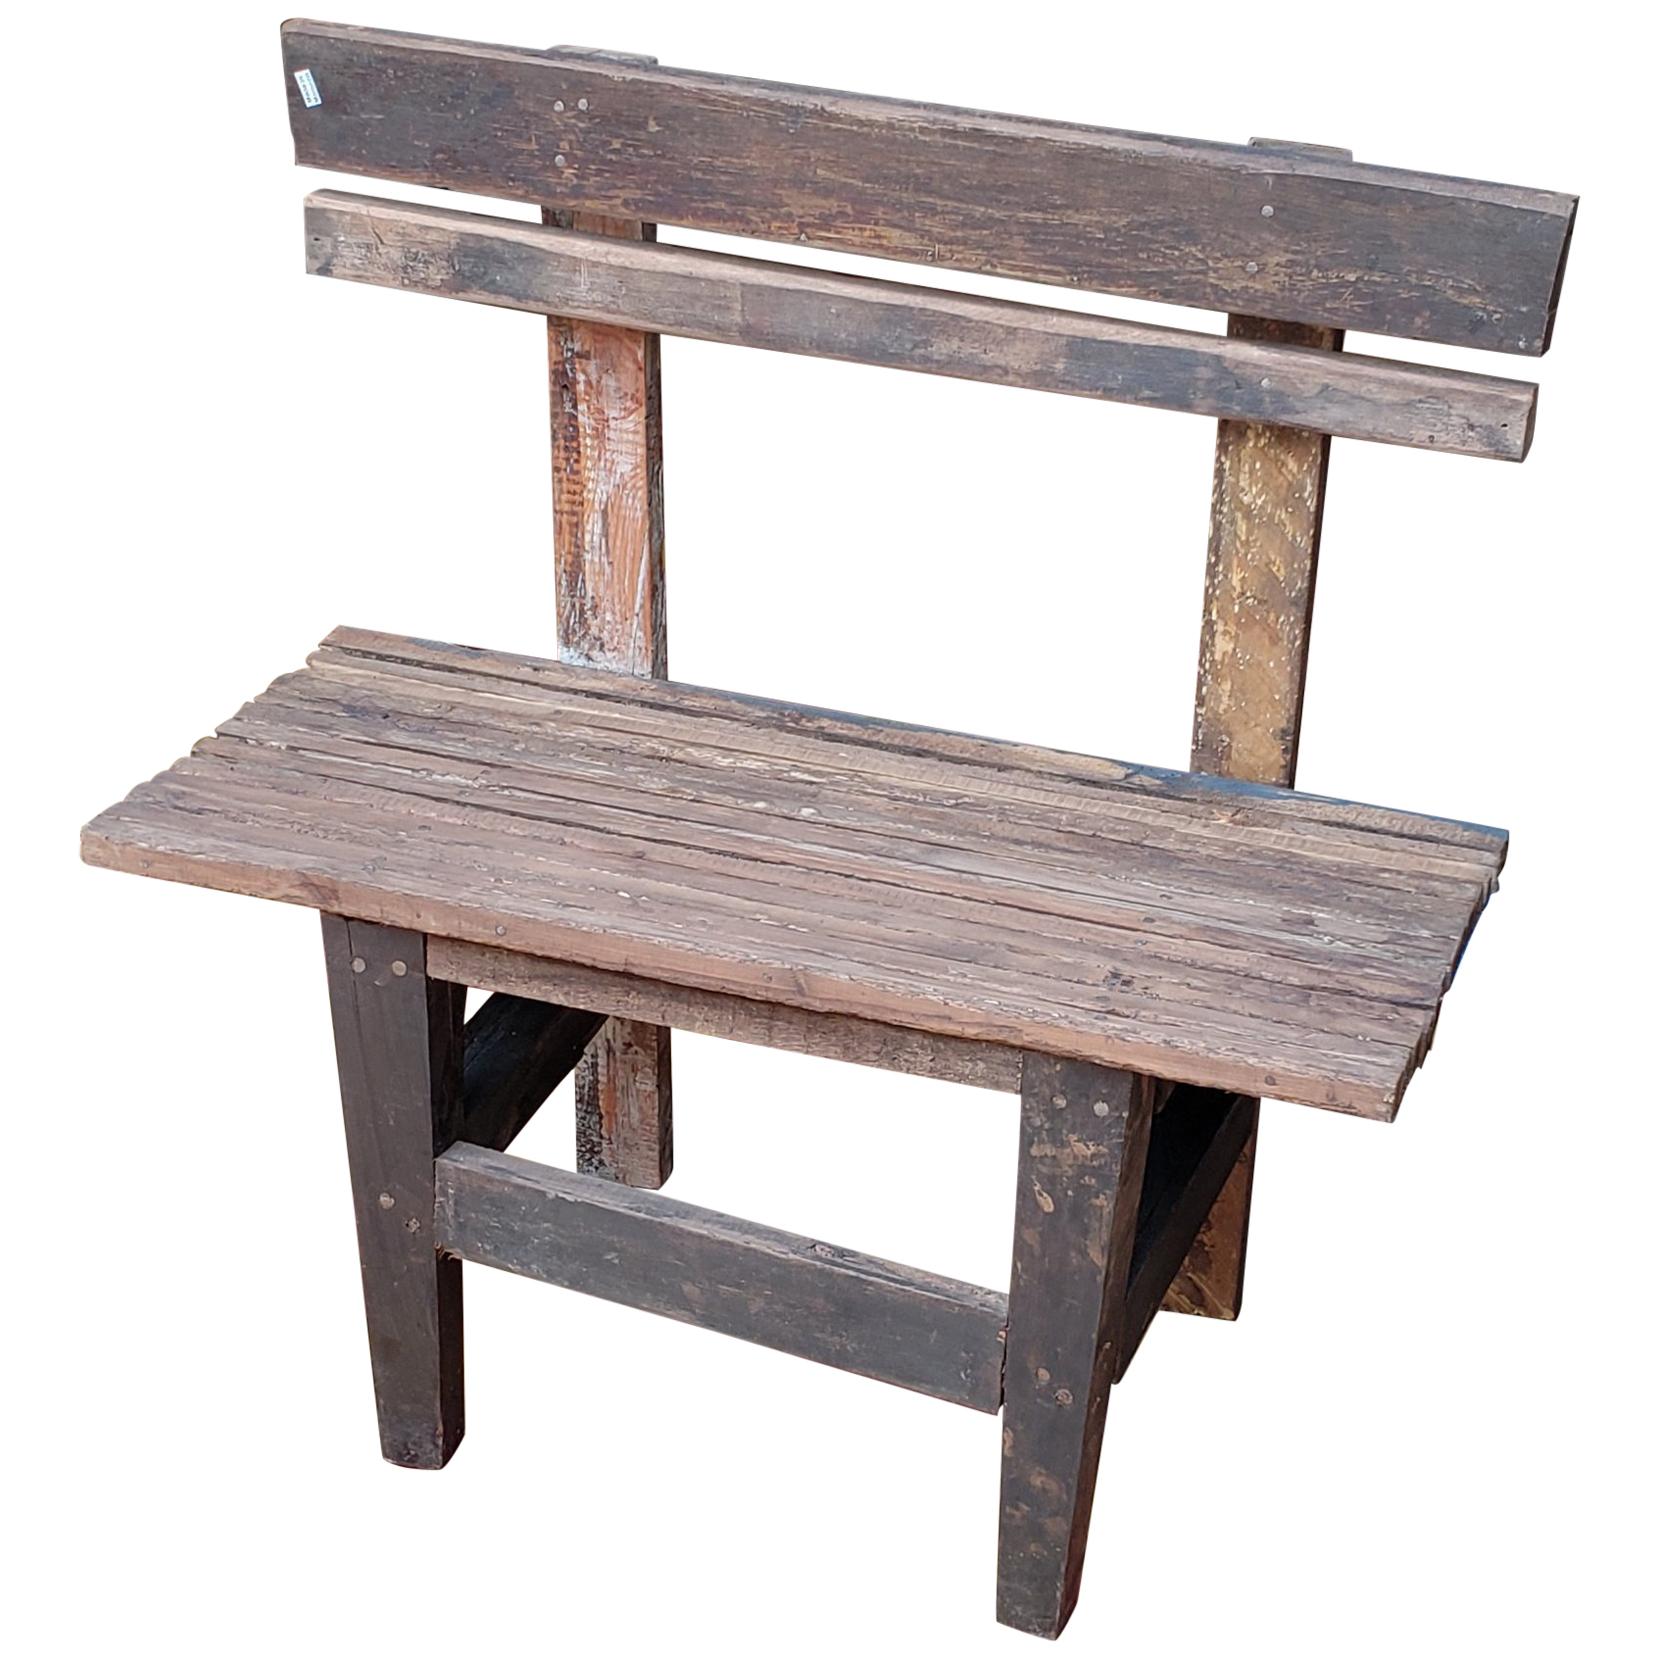 Moroccan Handmade Old Wood Park Bench, 1 Seat For Sale